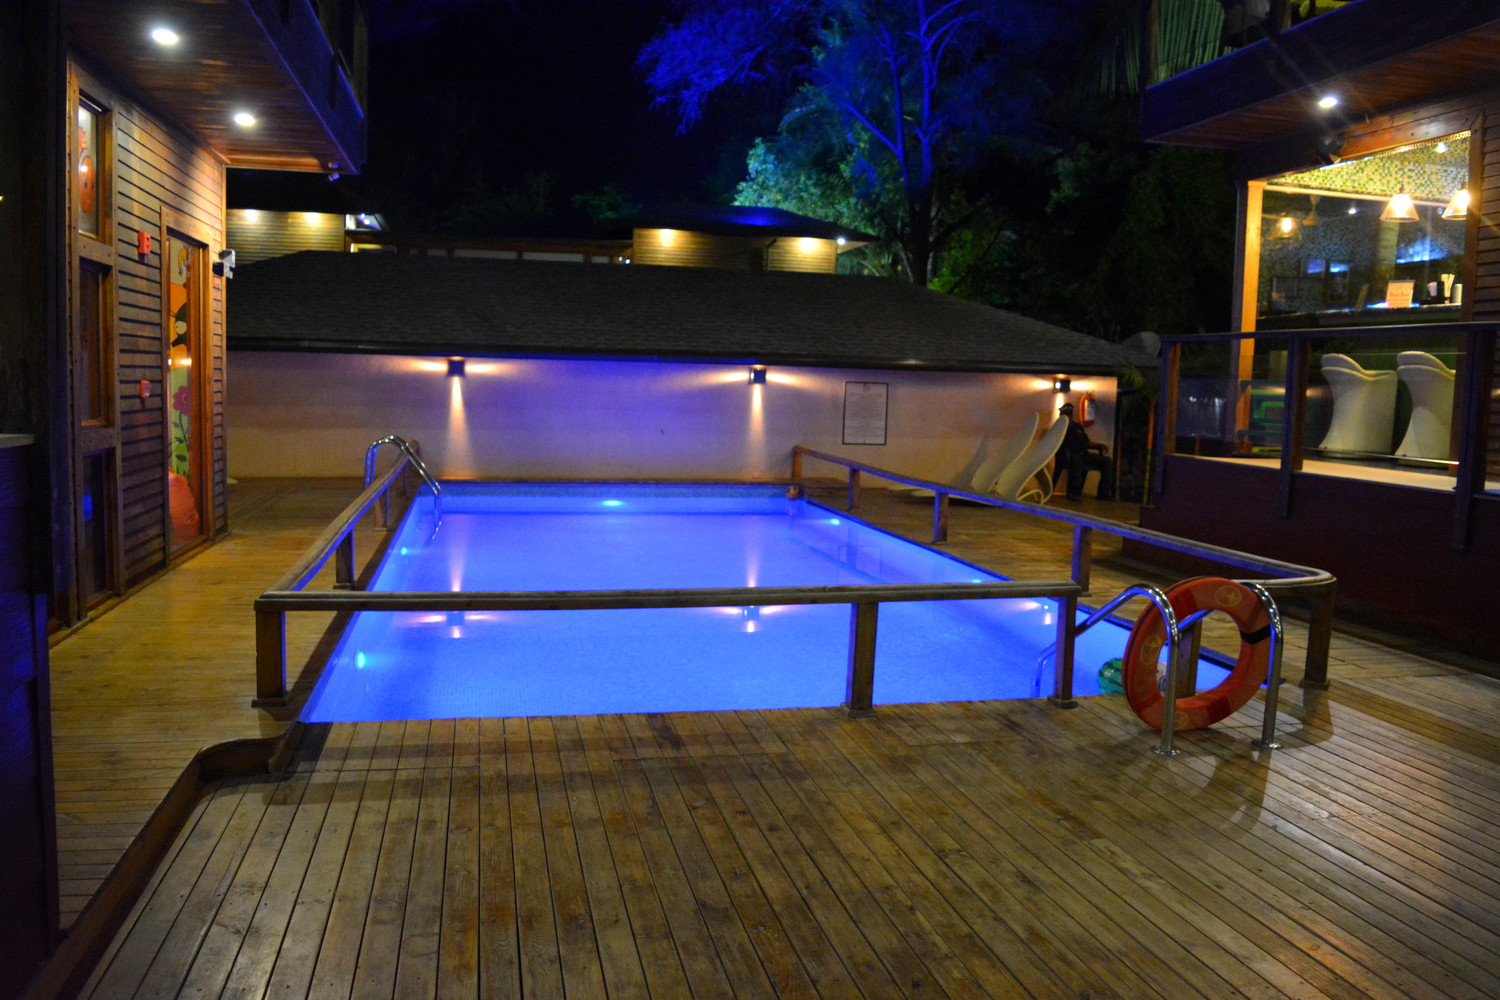 Swimming pool lit with a blue light at night